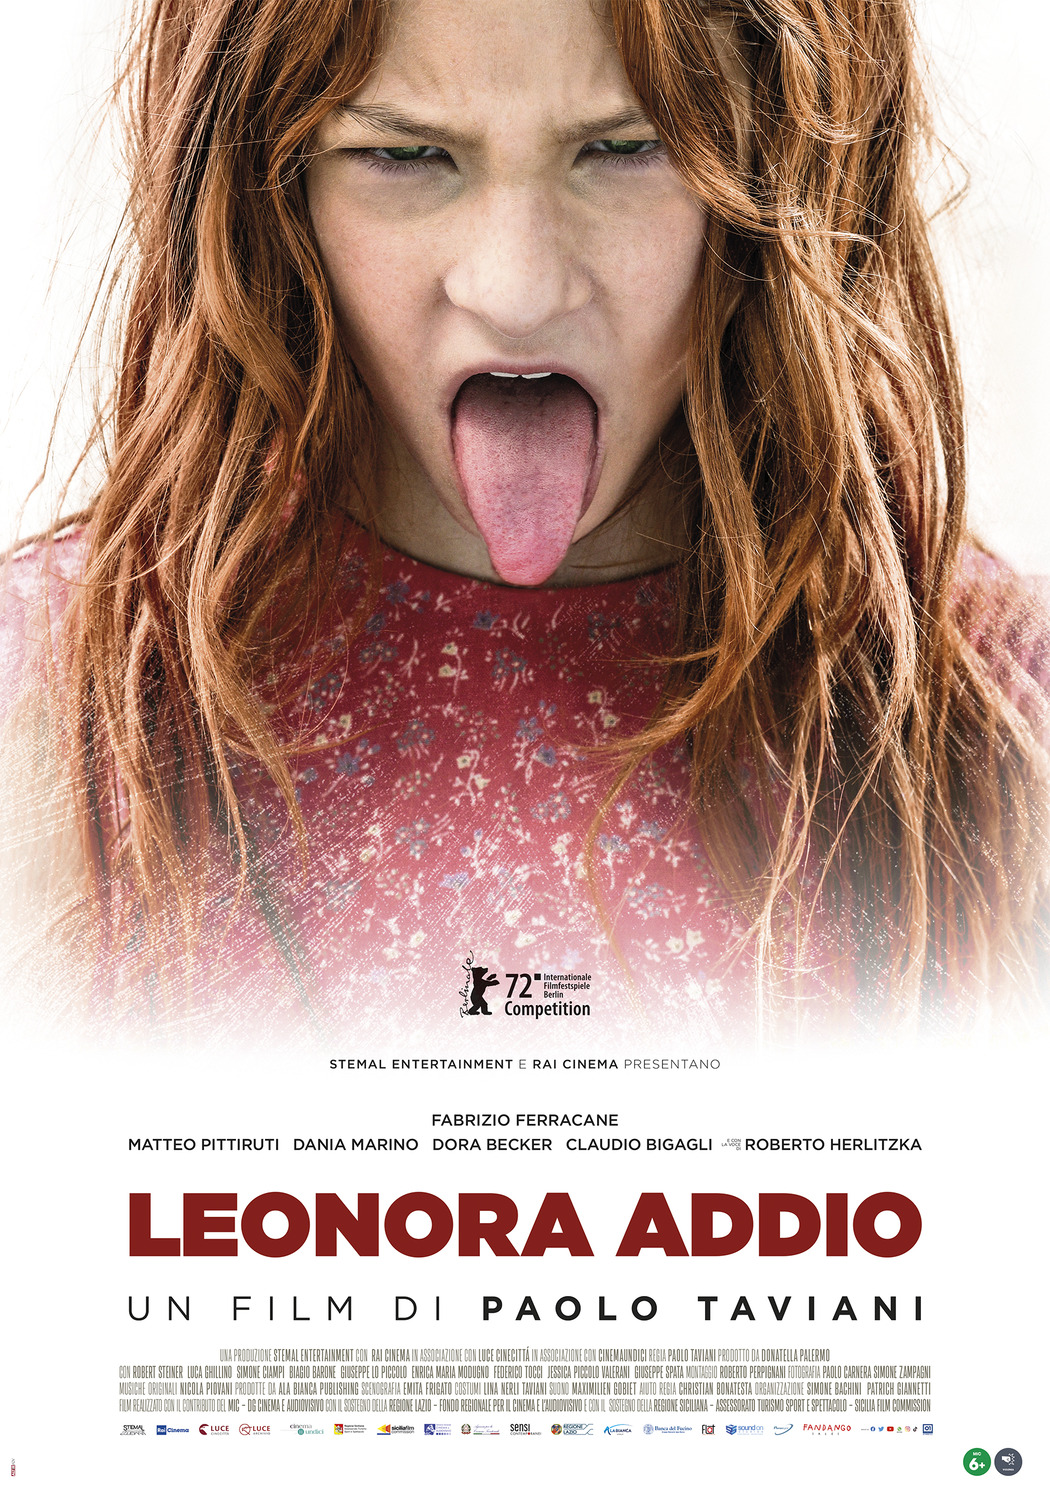 Extra Large Movie Poster Image for Leonora addio 